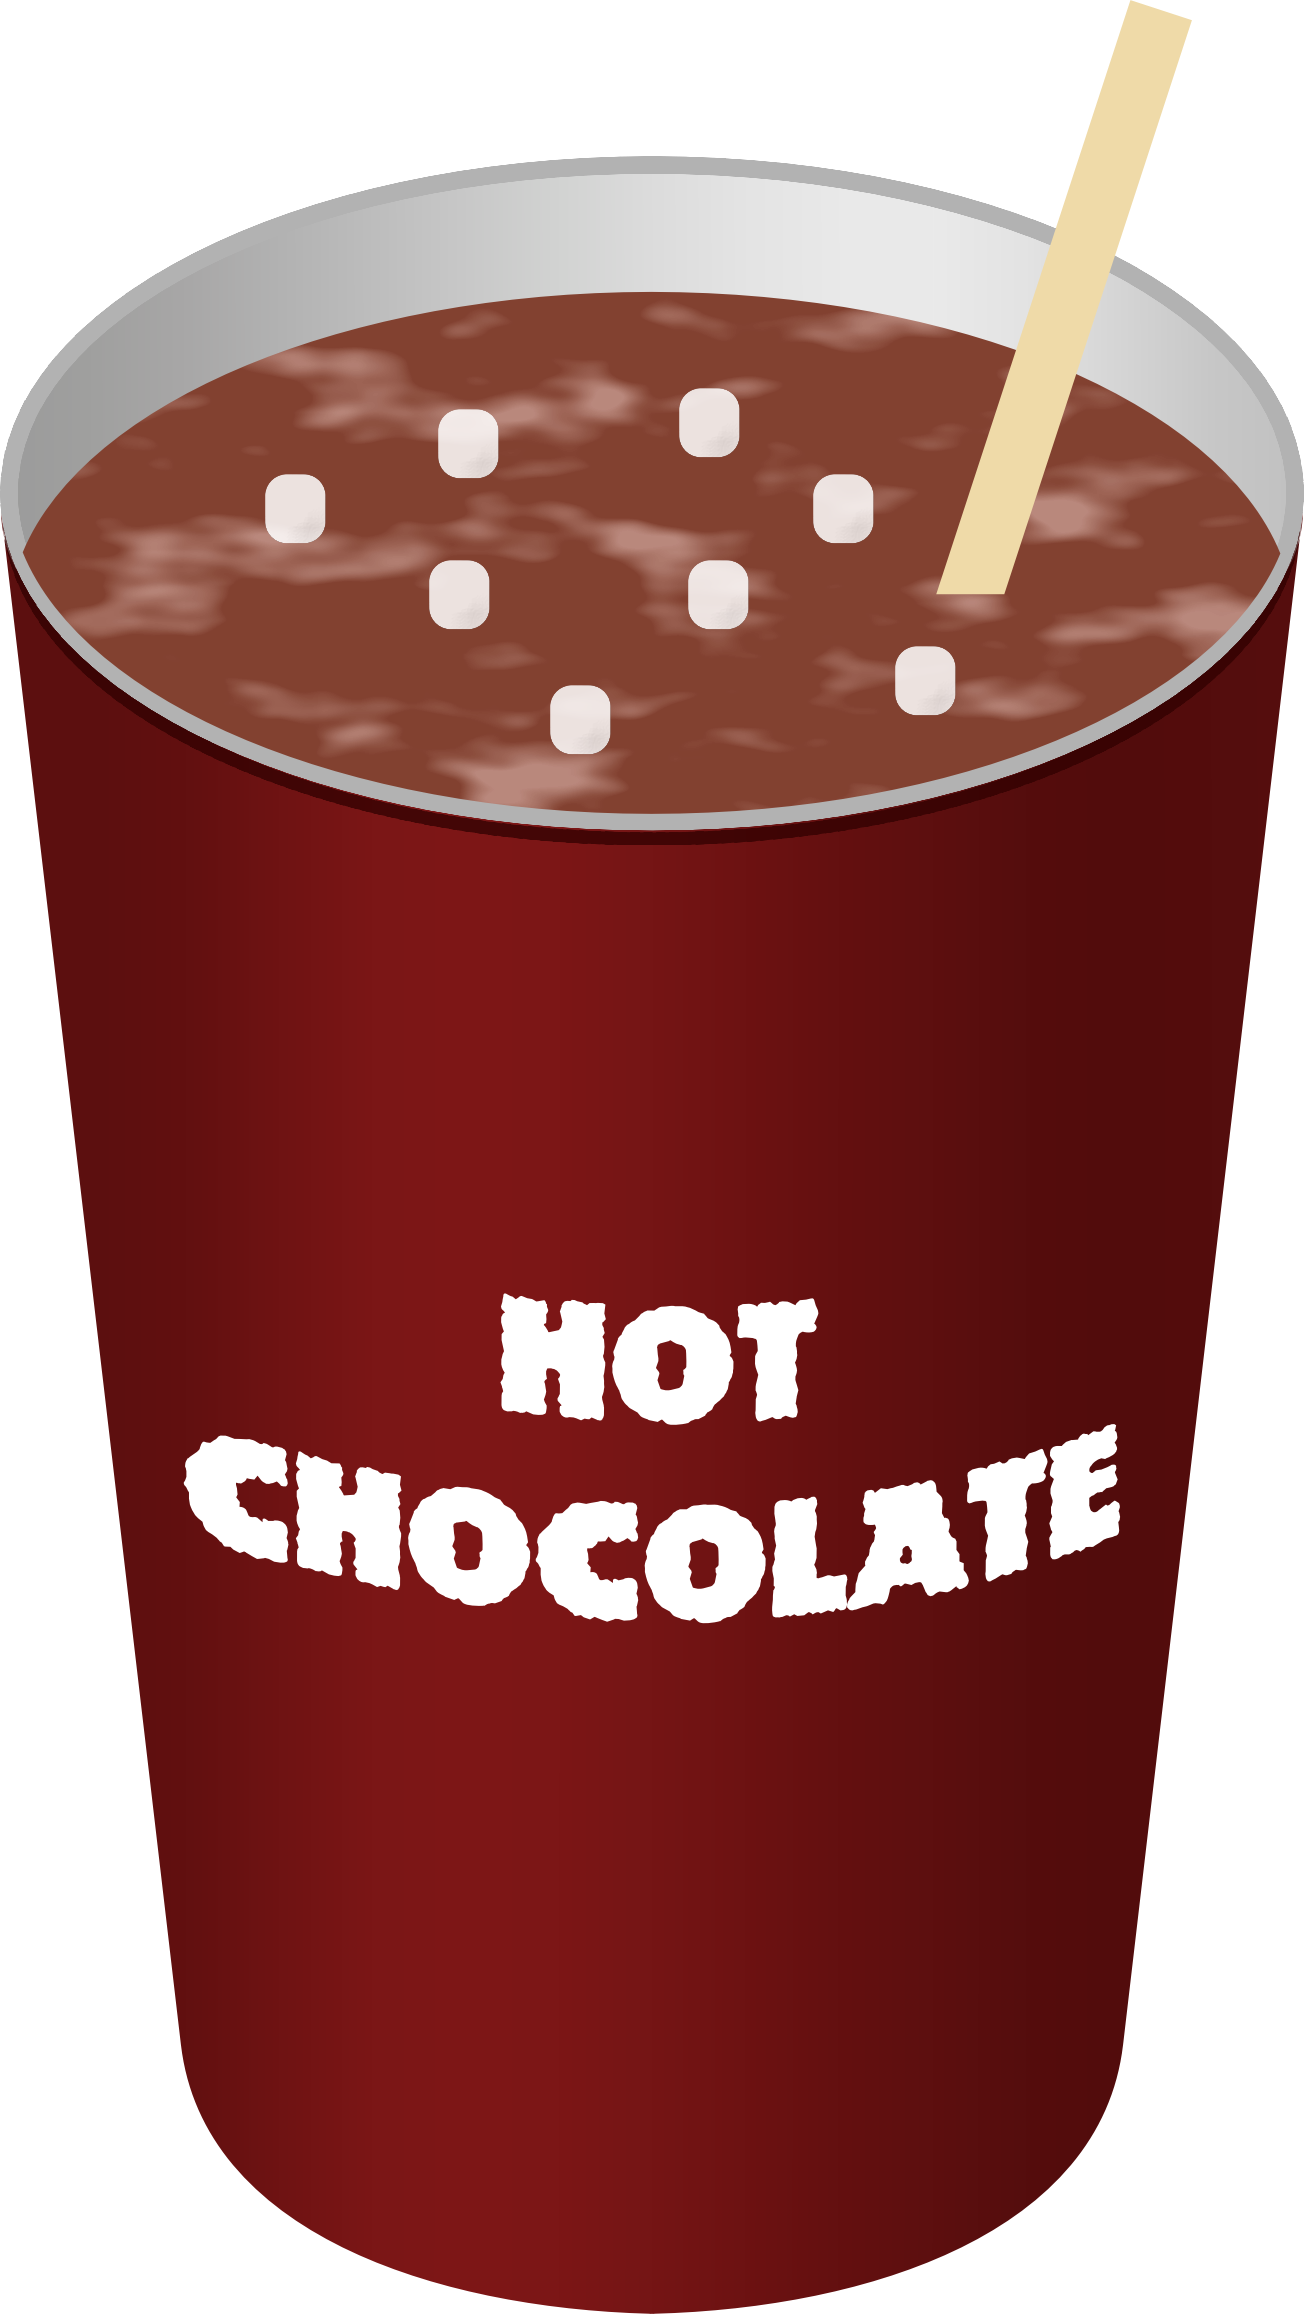 Big Image (Png) - Hot Chocolate, Transparent background PNG HD thumbnail